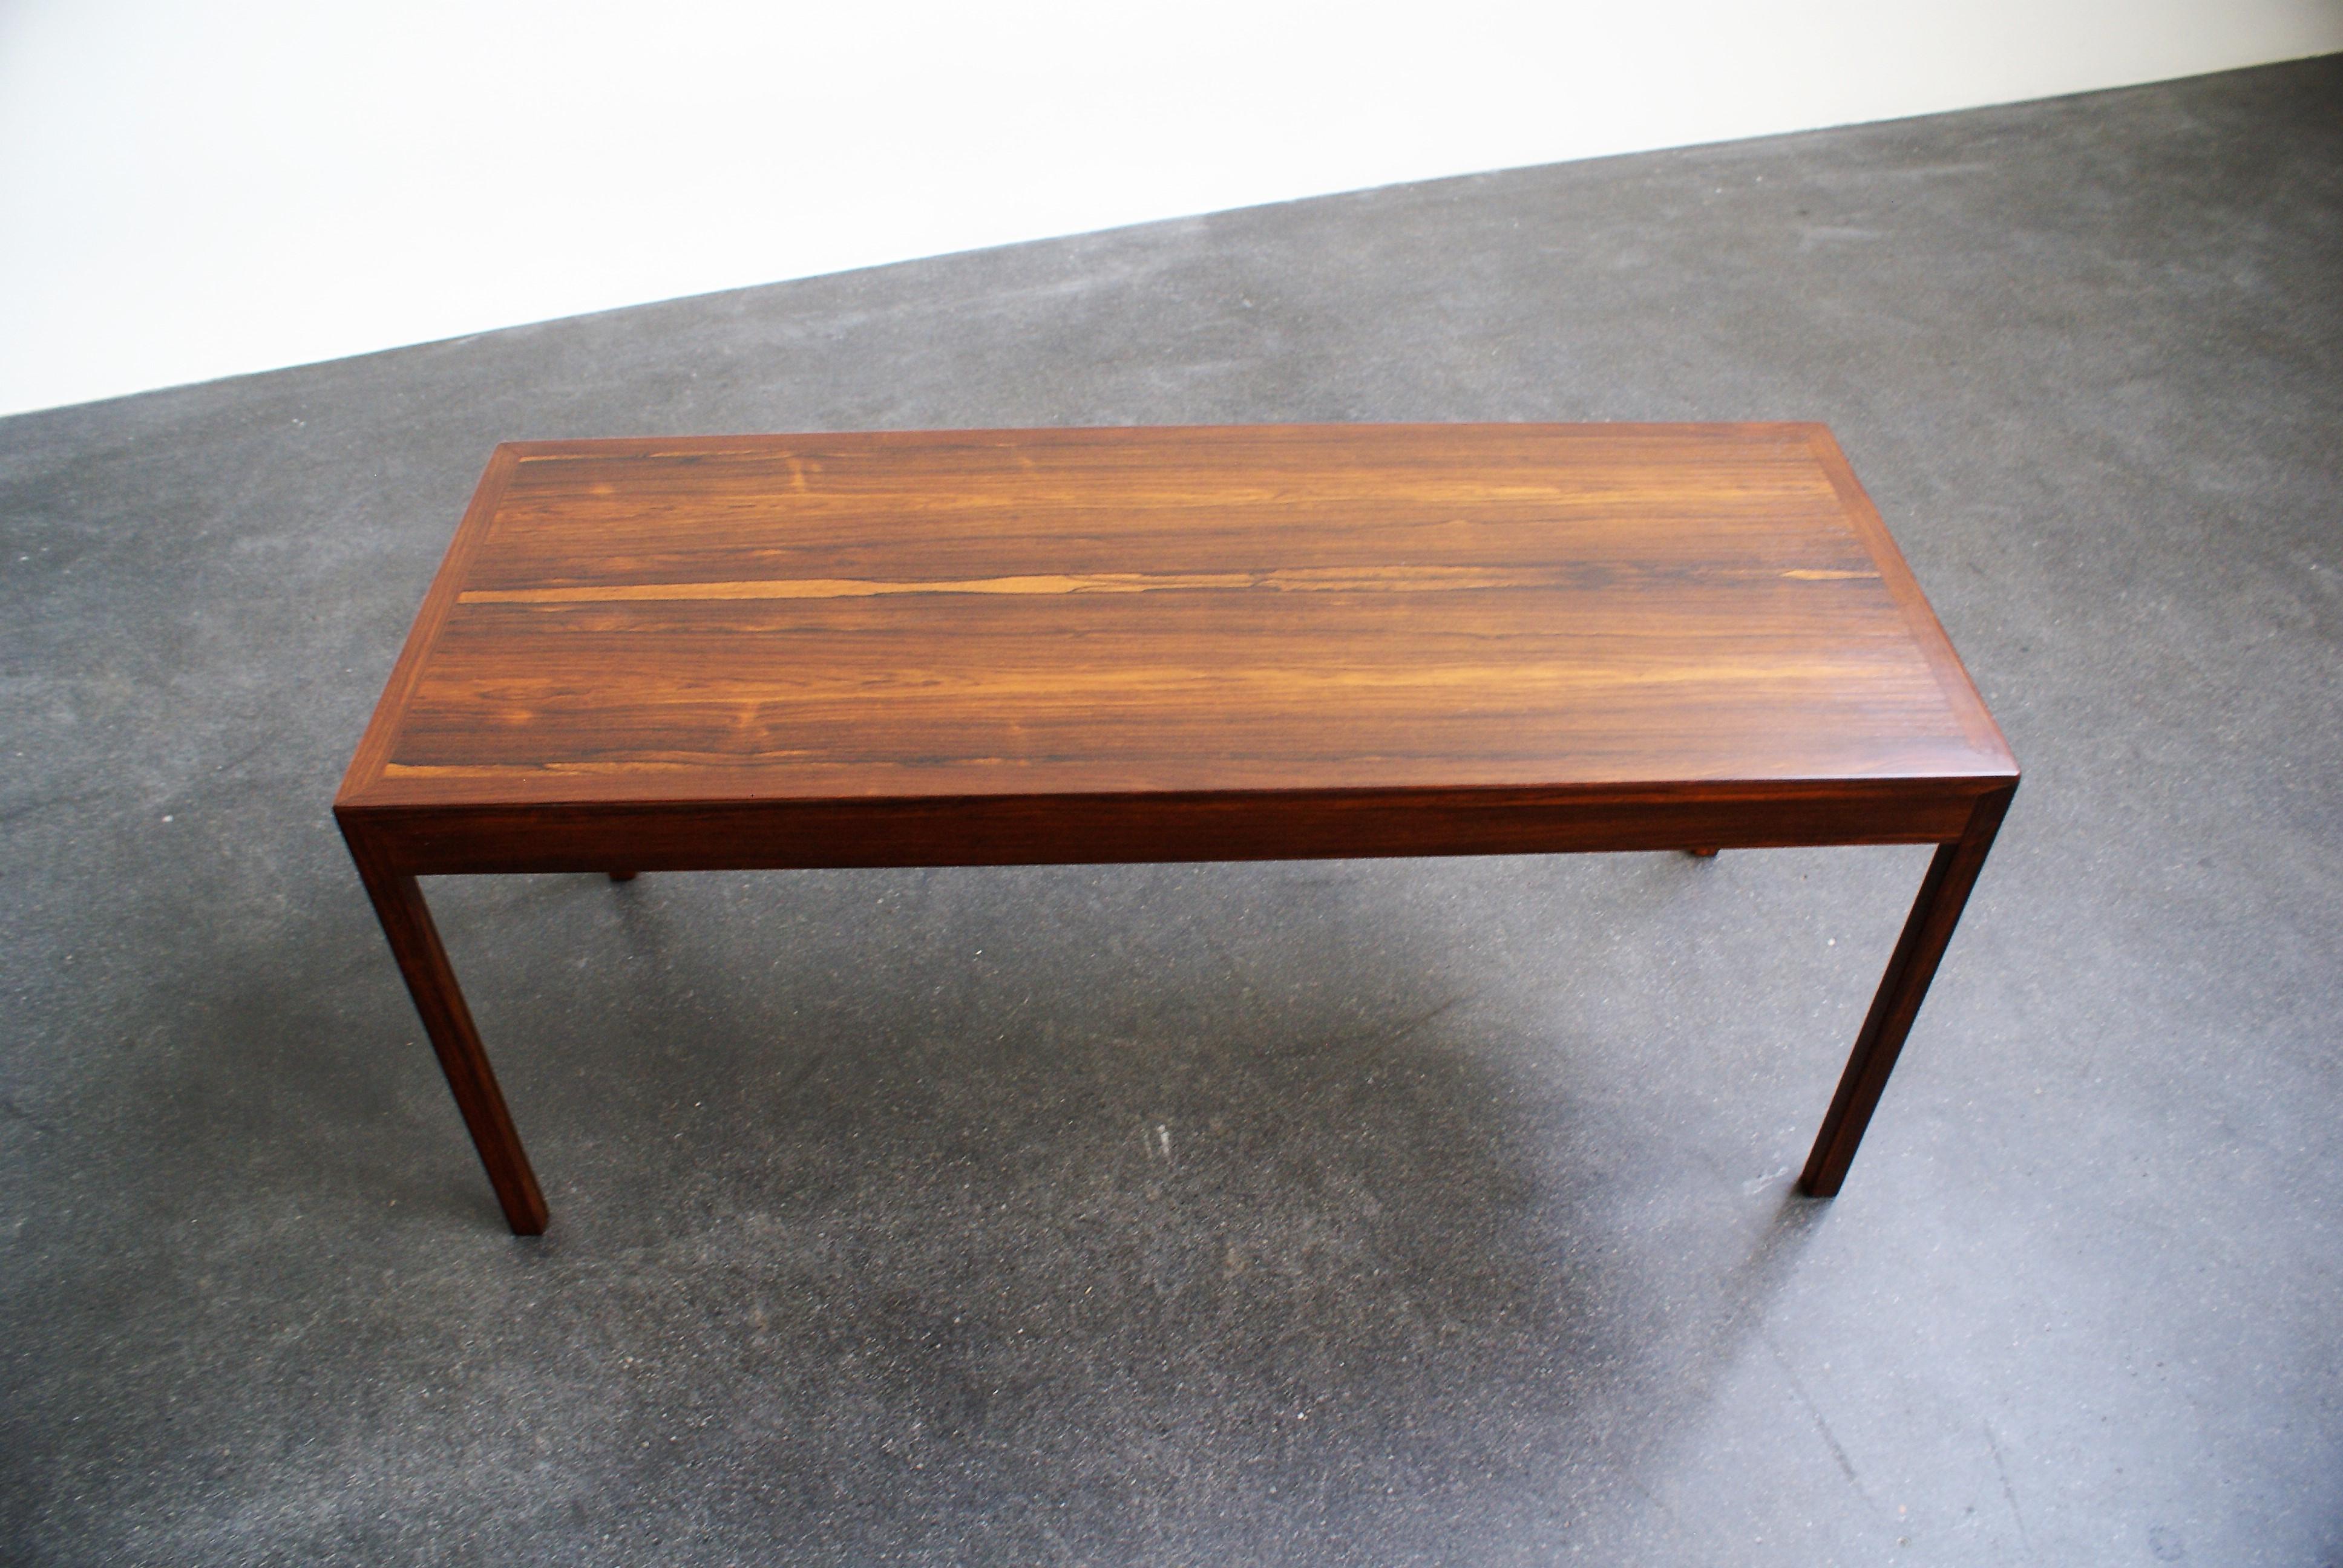 Ole Wanscher Extendable Low Table in Brazilian Rosewood for A. J. Iversen, 1950s For Sale 1